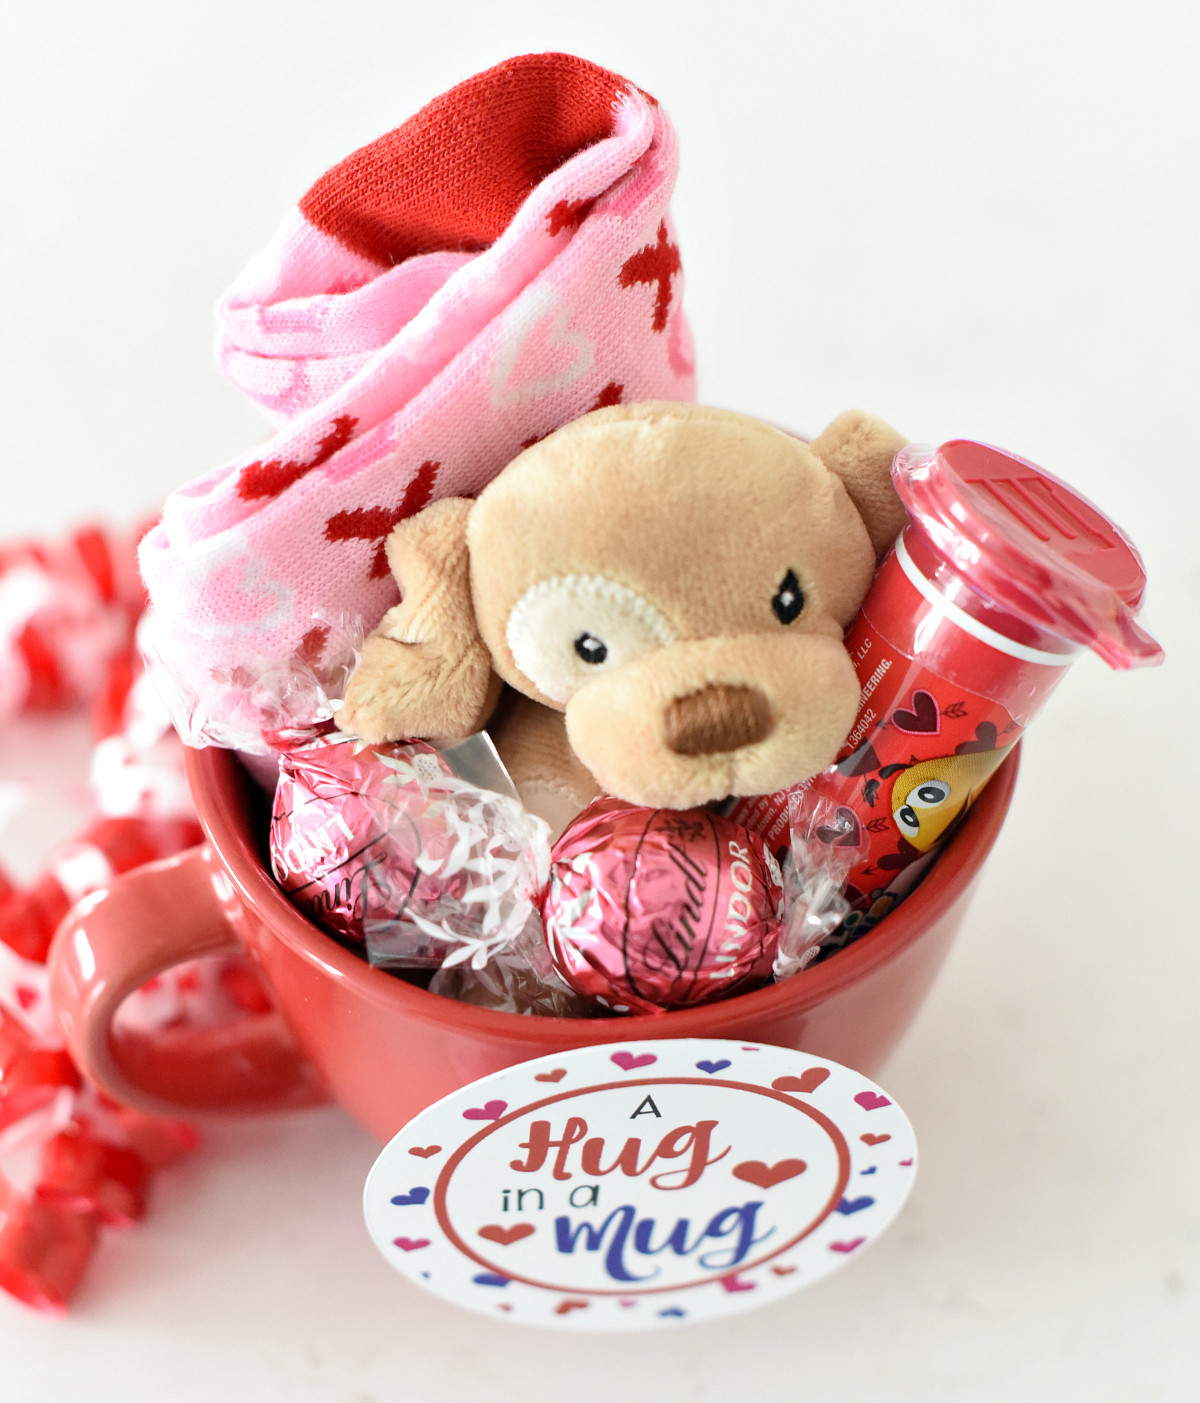 Valentines Gift Ideas For Toddlers
 Fun Valentines Gift Idea for Kids – Fun Squared